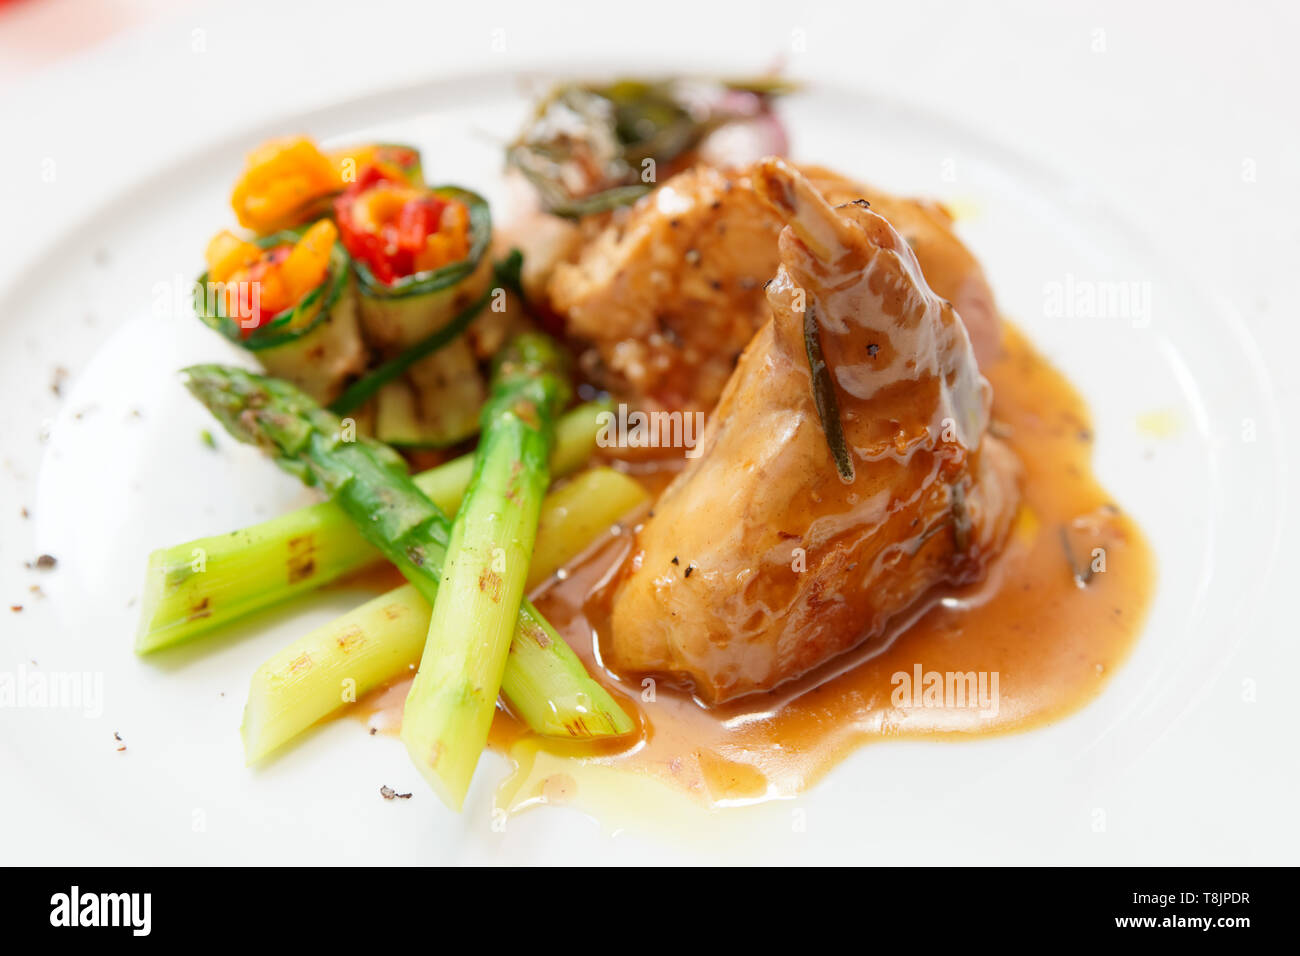 Rabbit stew with vegetables on plate Stock Photo